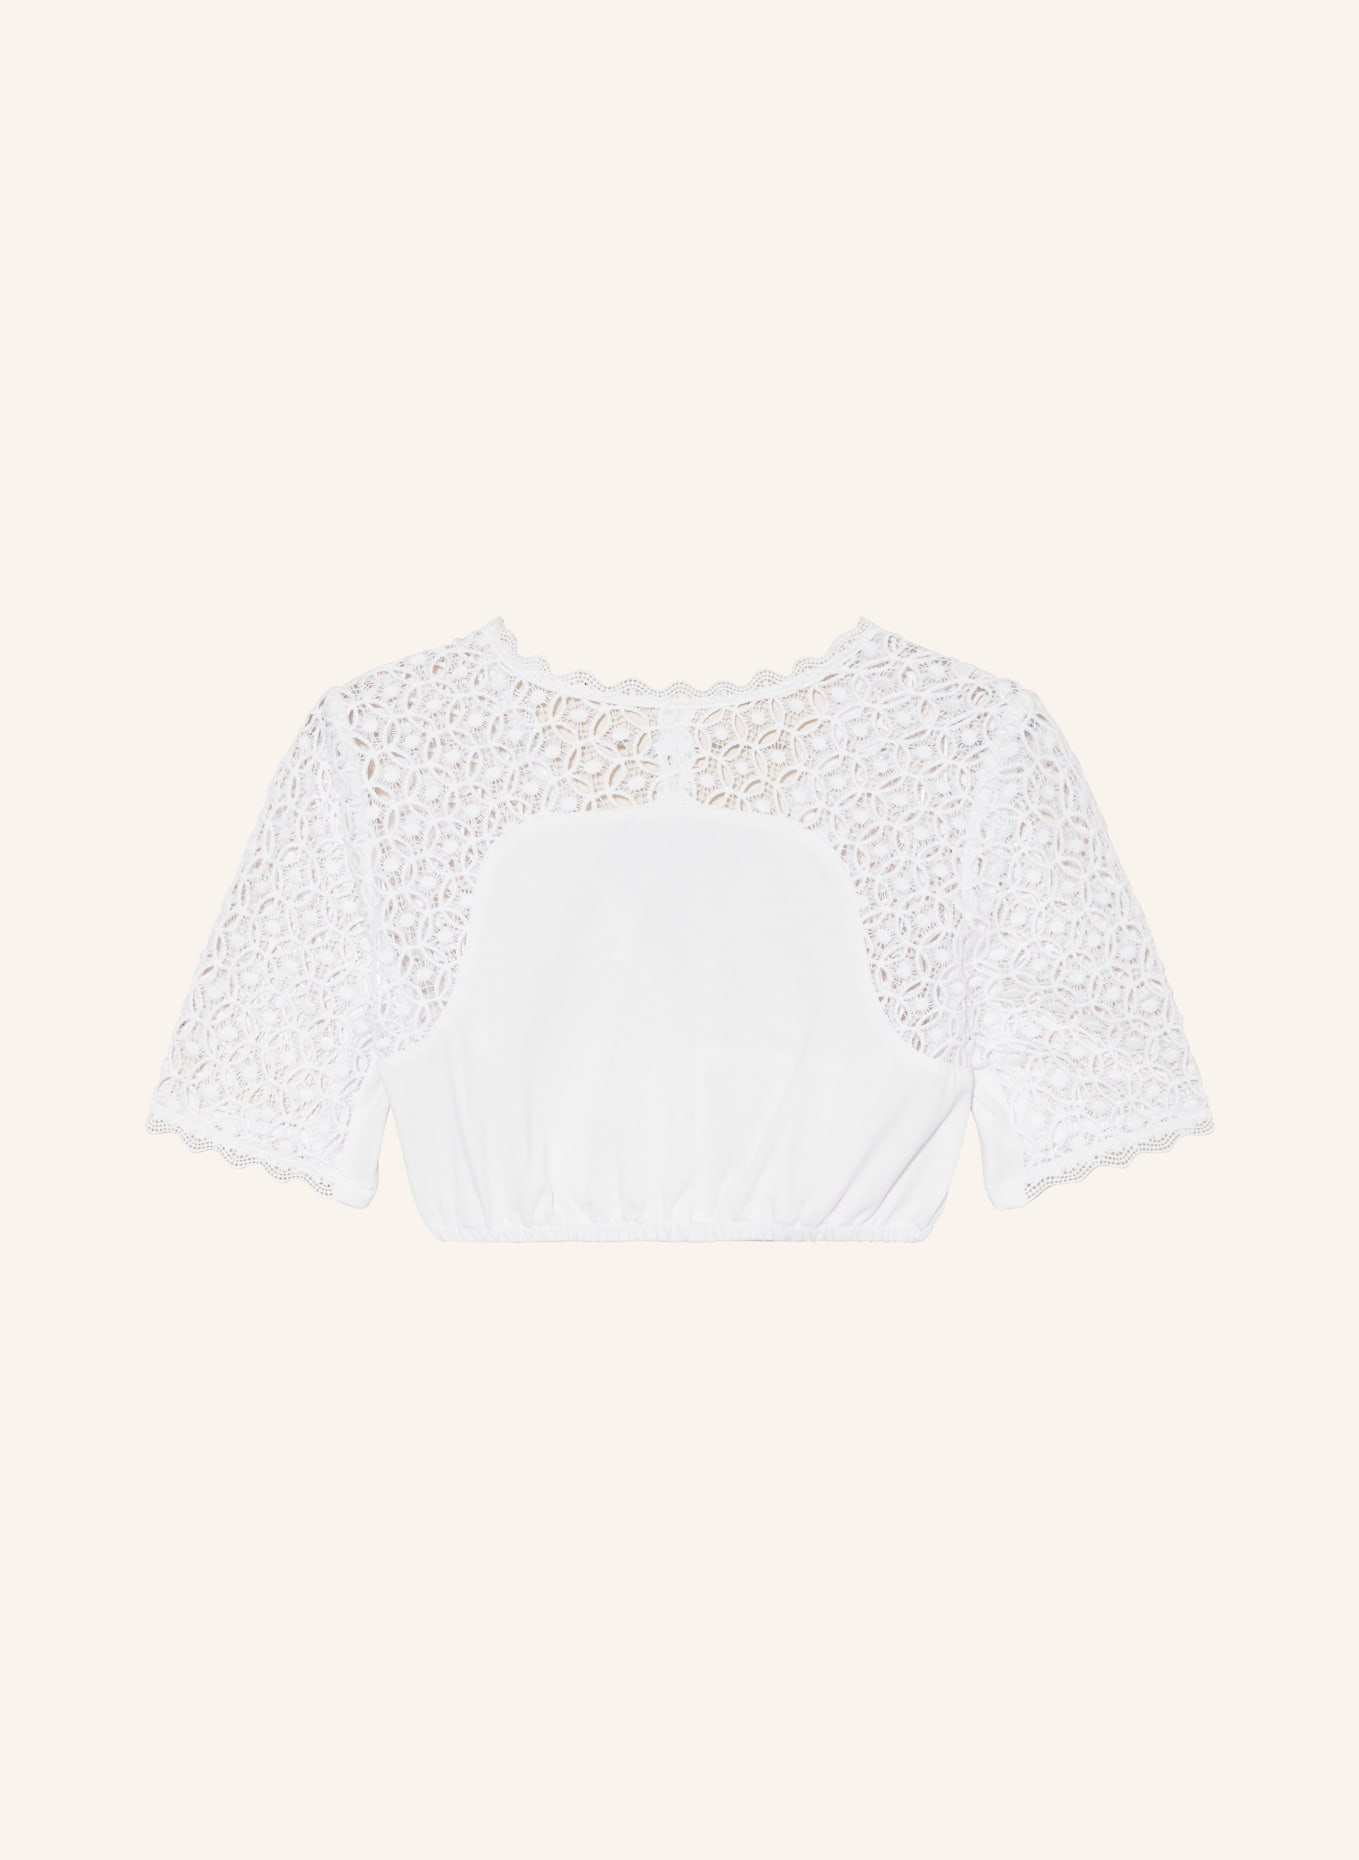 WALDORFF Dirndl blouse with crochet lace, Color: WHITE (Image 2)